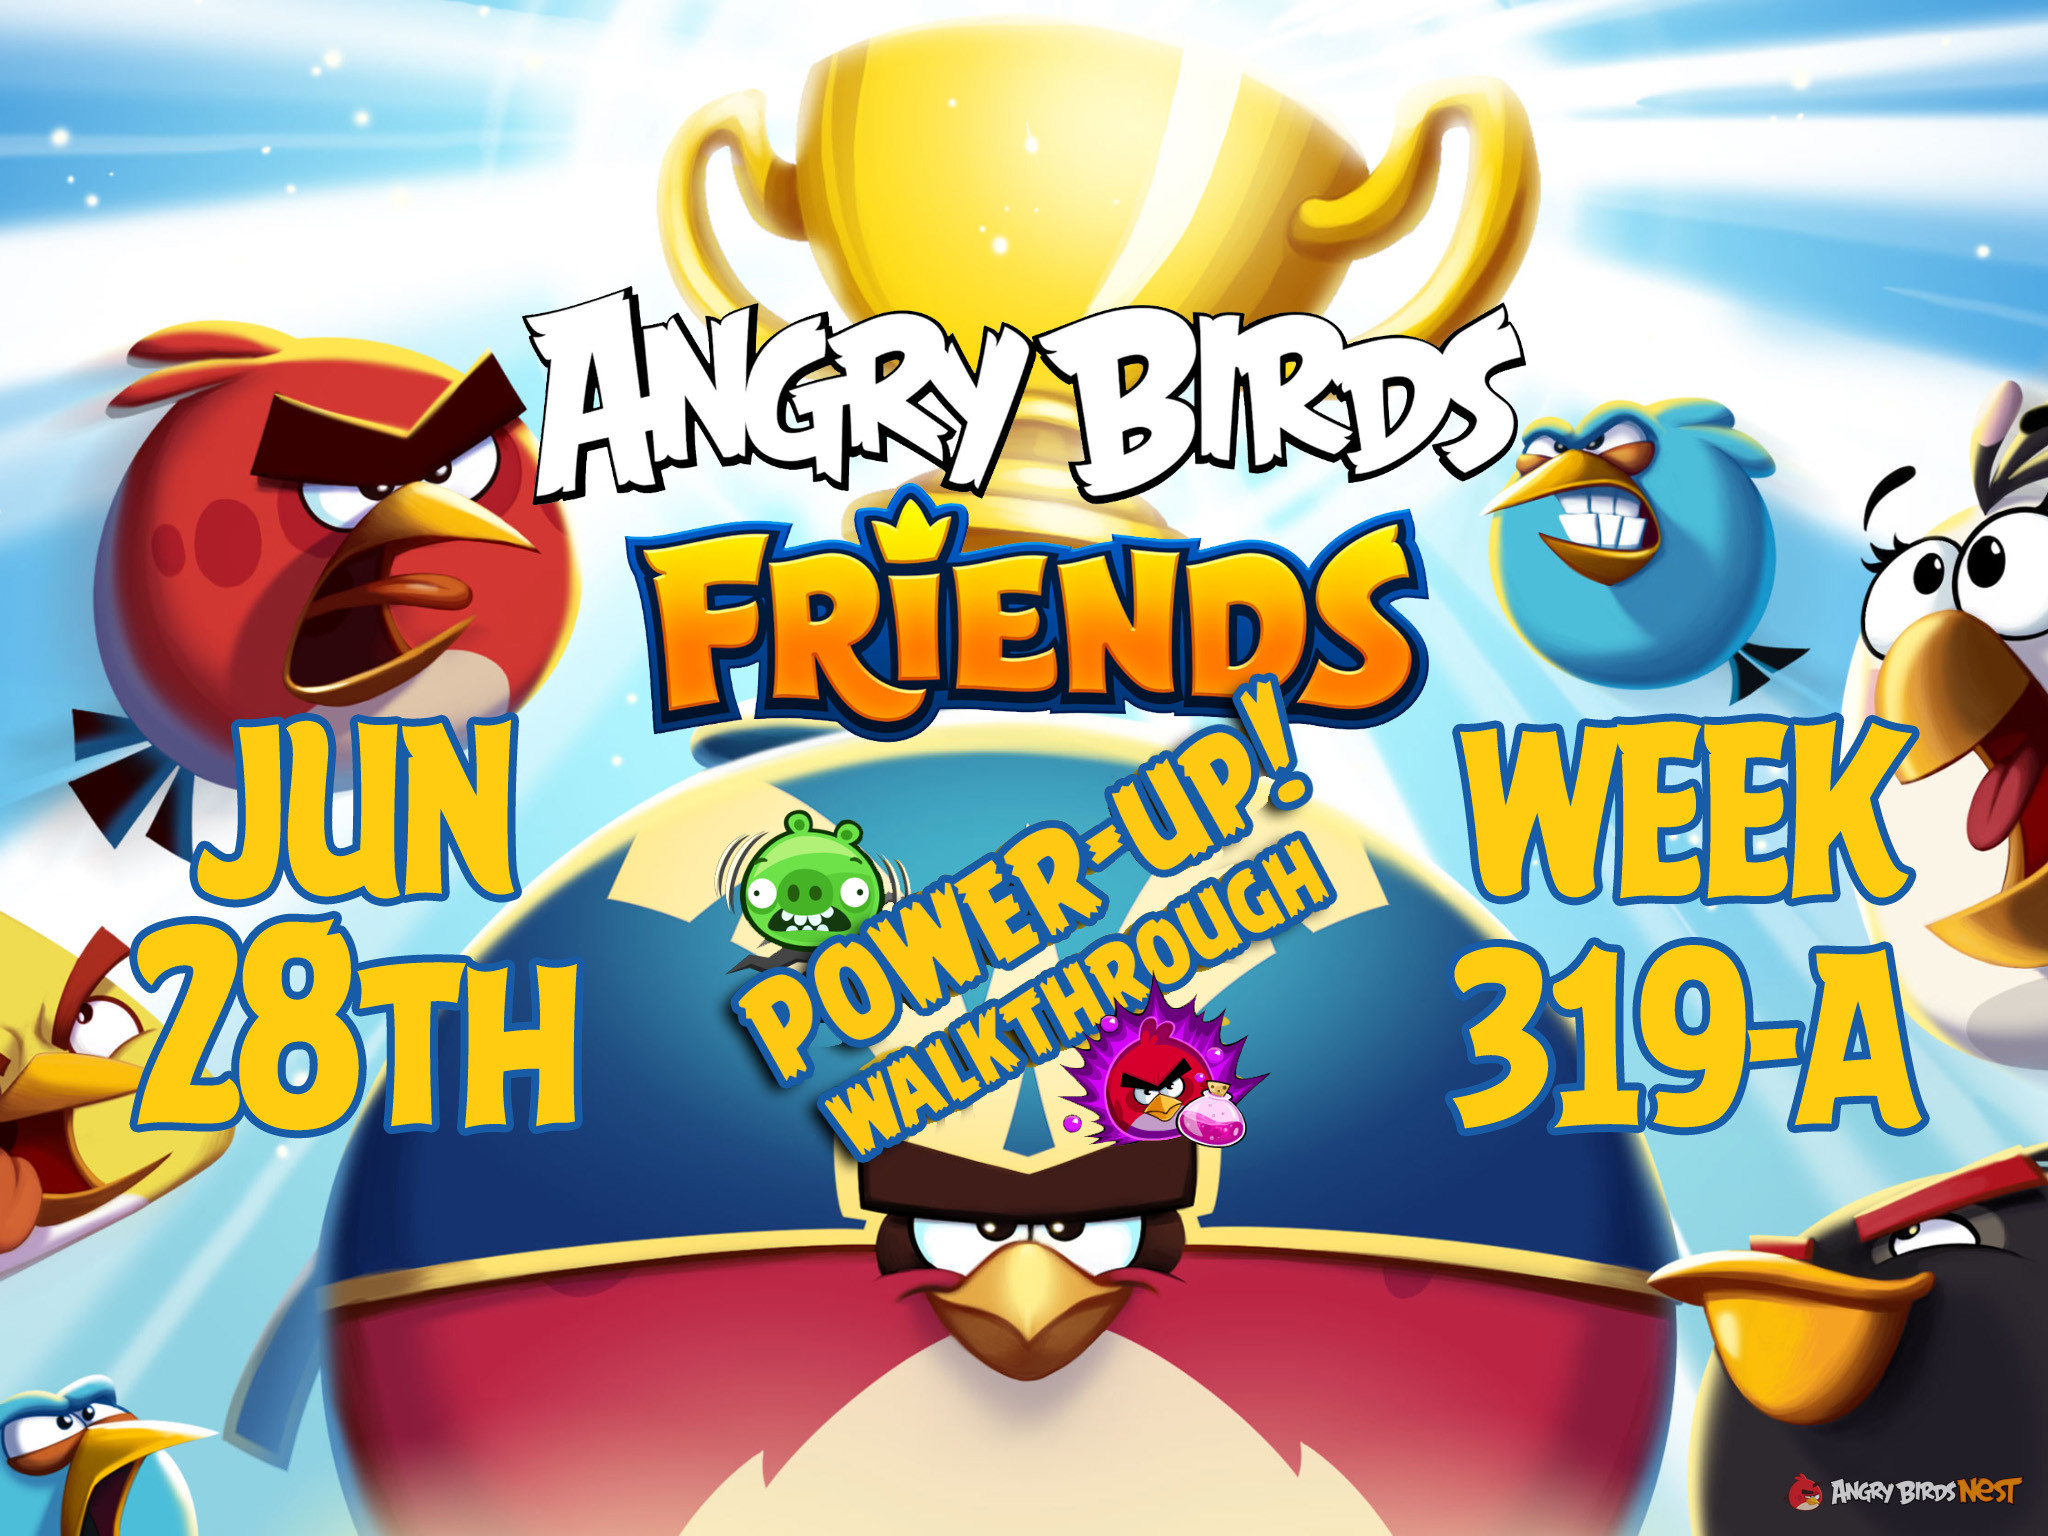 Angry-Birds-Friends-Tournament-Week-319-A-Feature-Image-PU